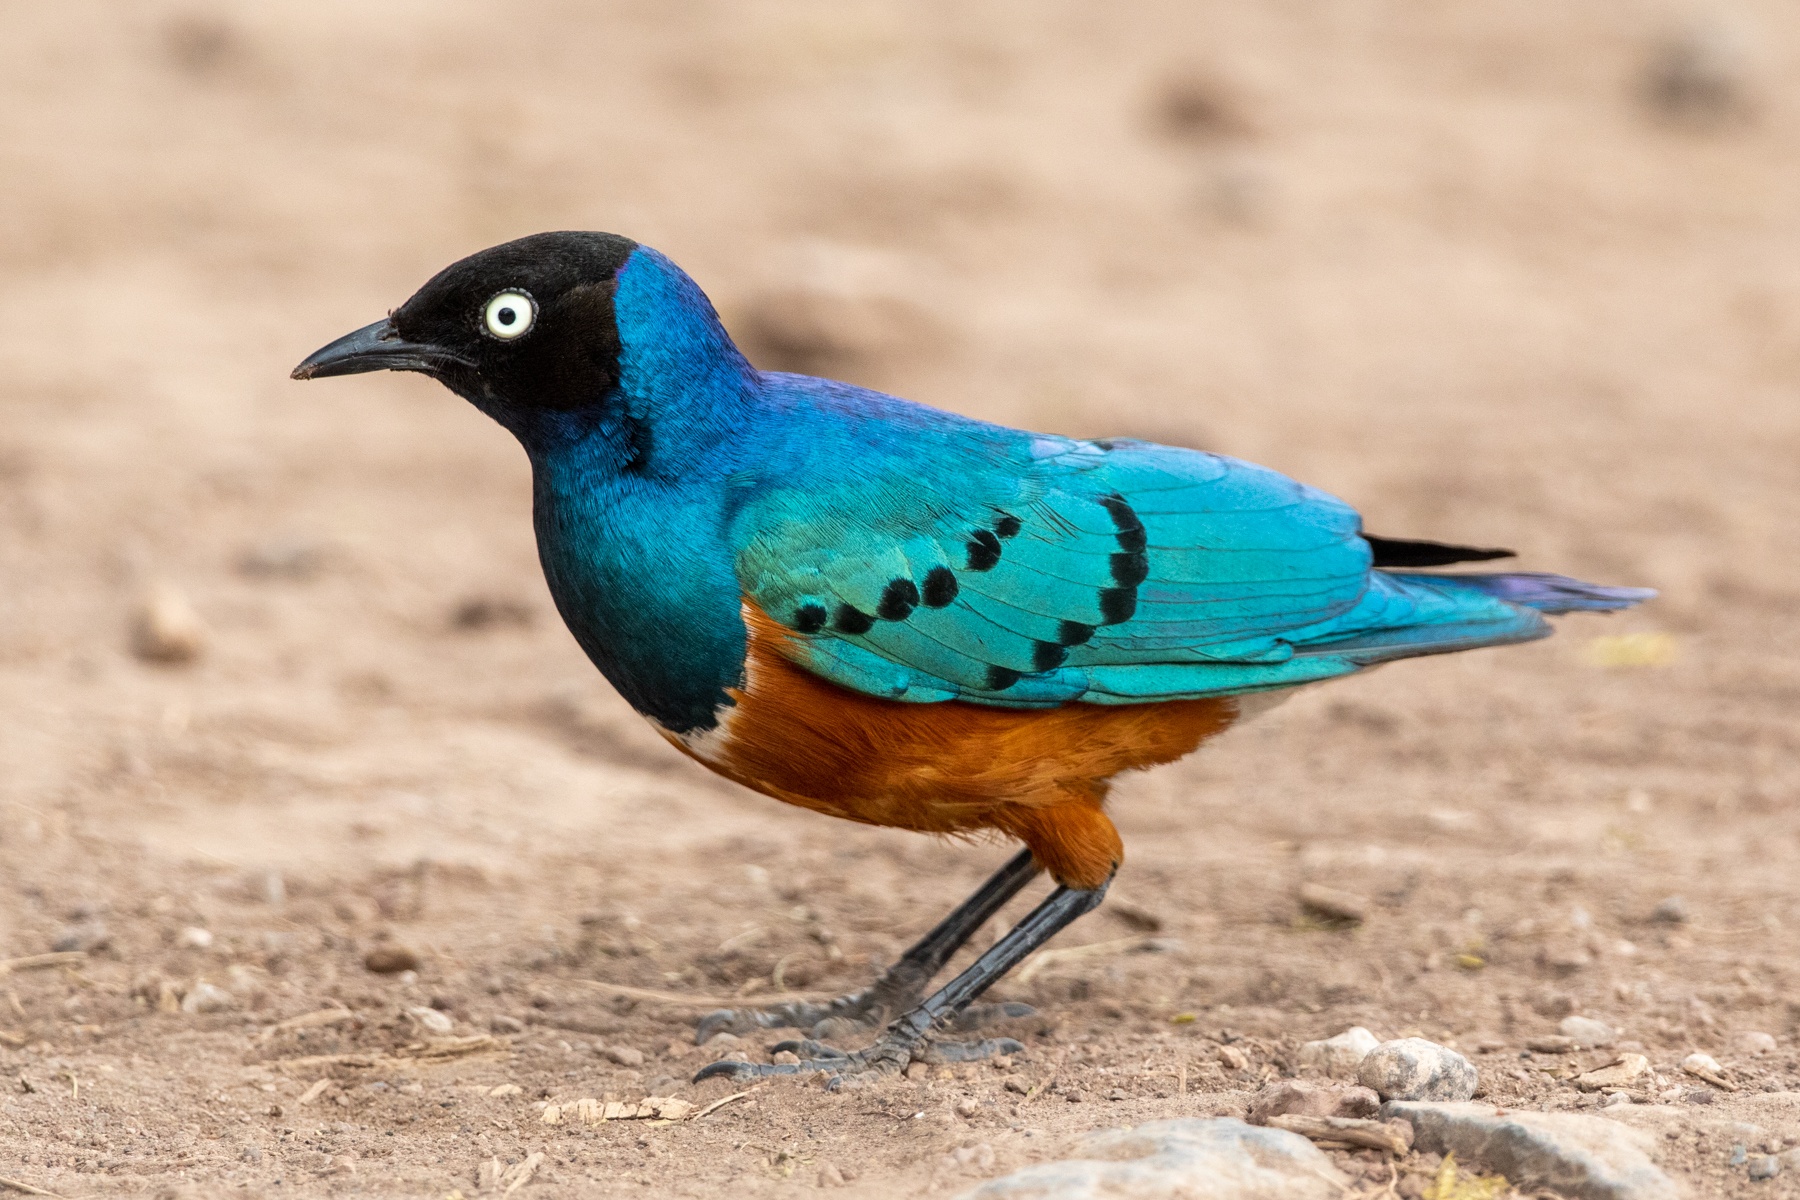 Beautiful Superb Starlings are very common to see on Tanzania safaris but can you ever see too many of them?